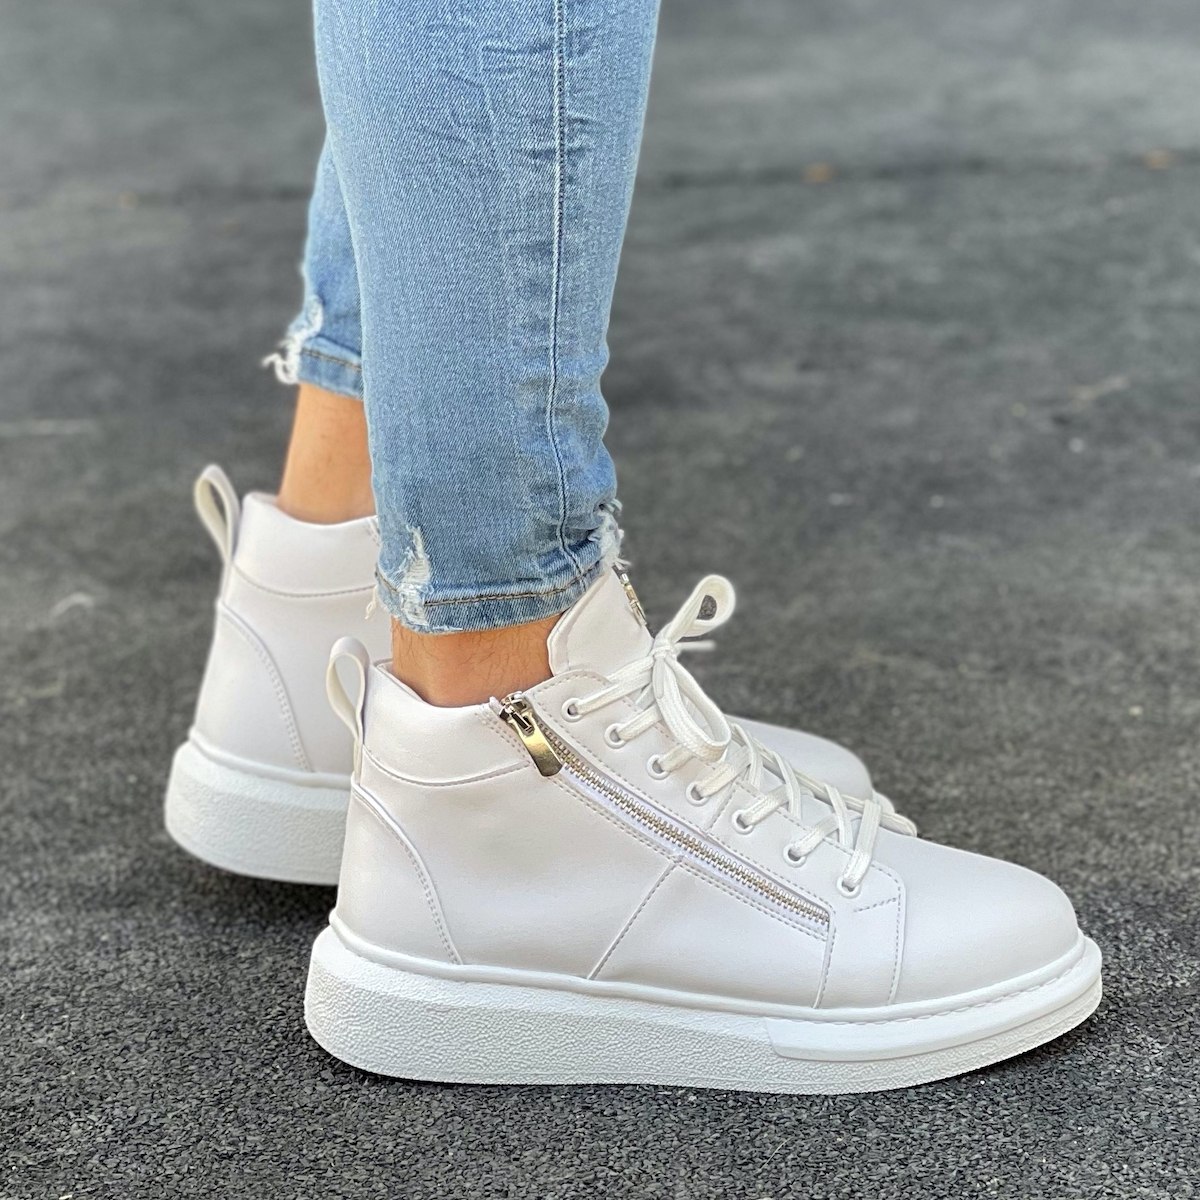 Hype Sole Zipped Style High Top Sneakers in Full White | Martin Valen